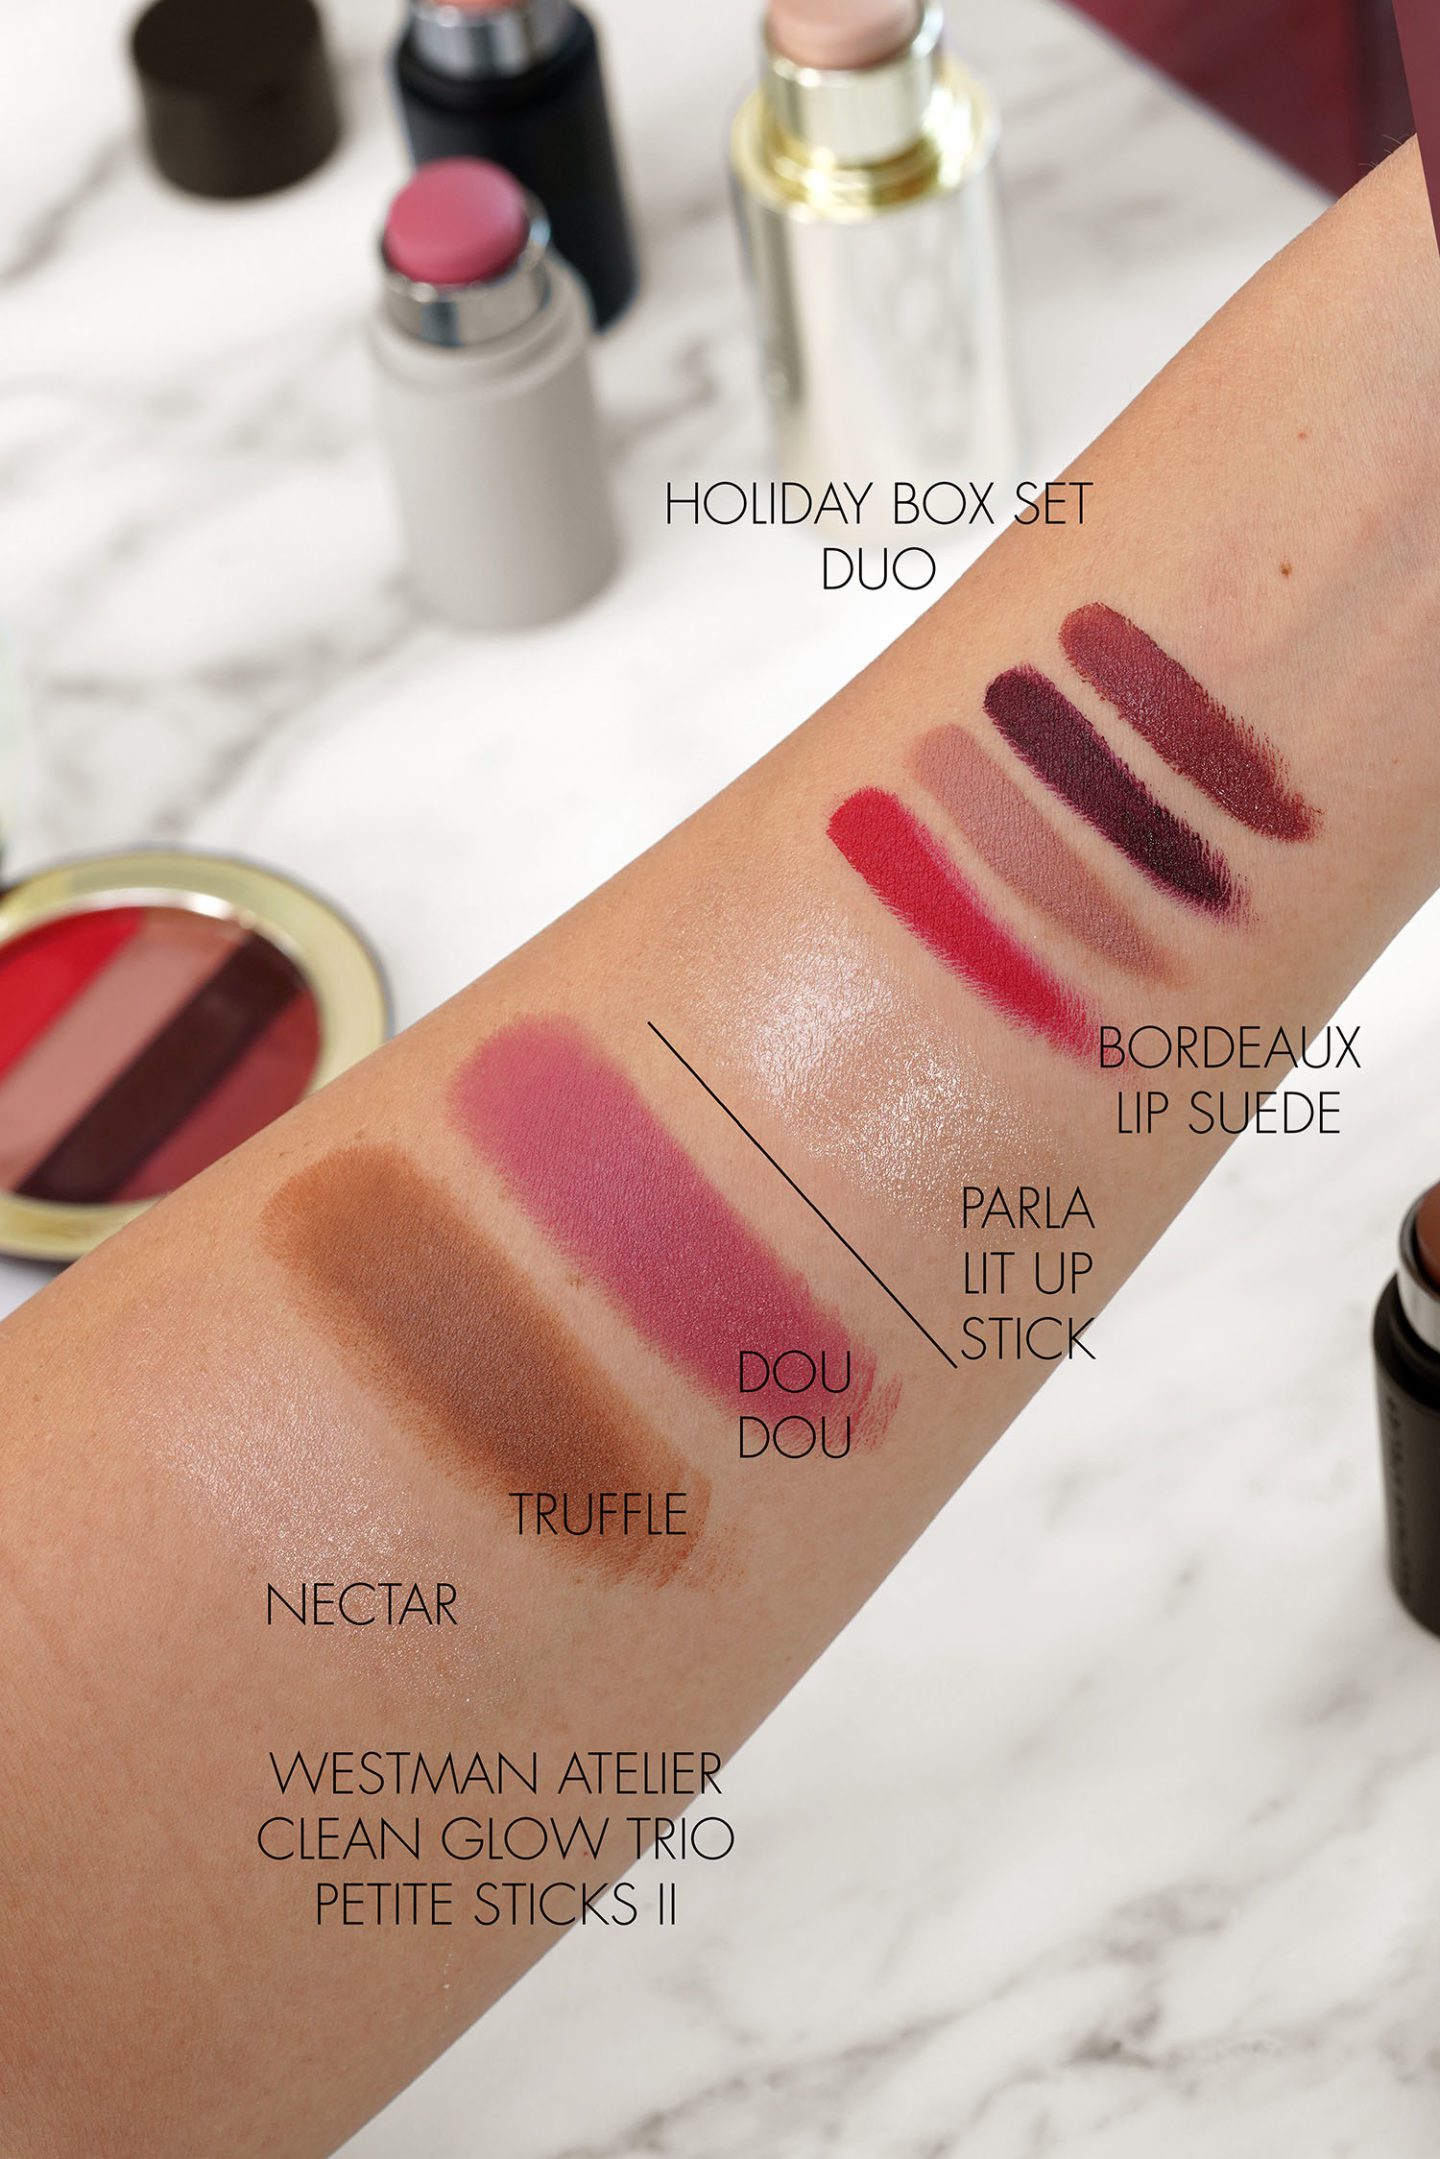 Westman Atelier Holiday Set swatches